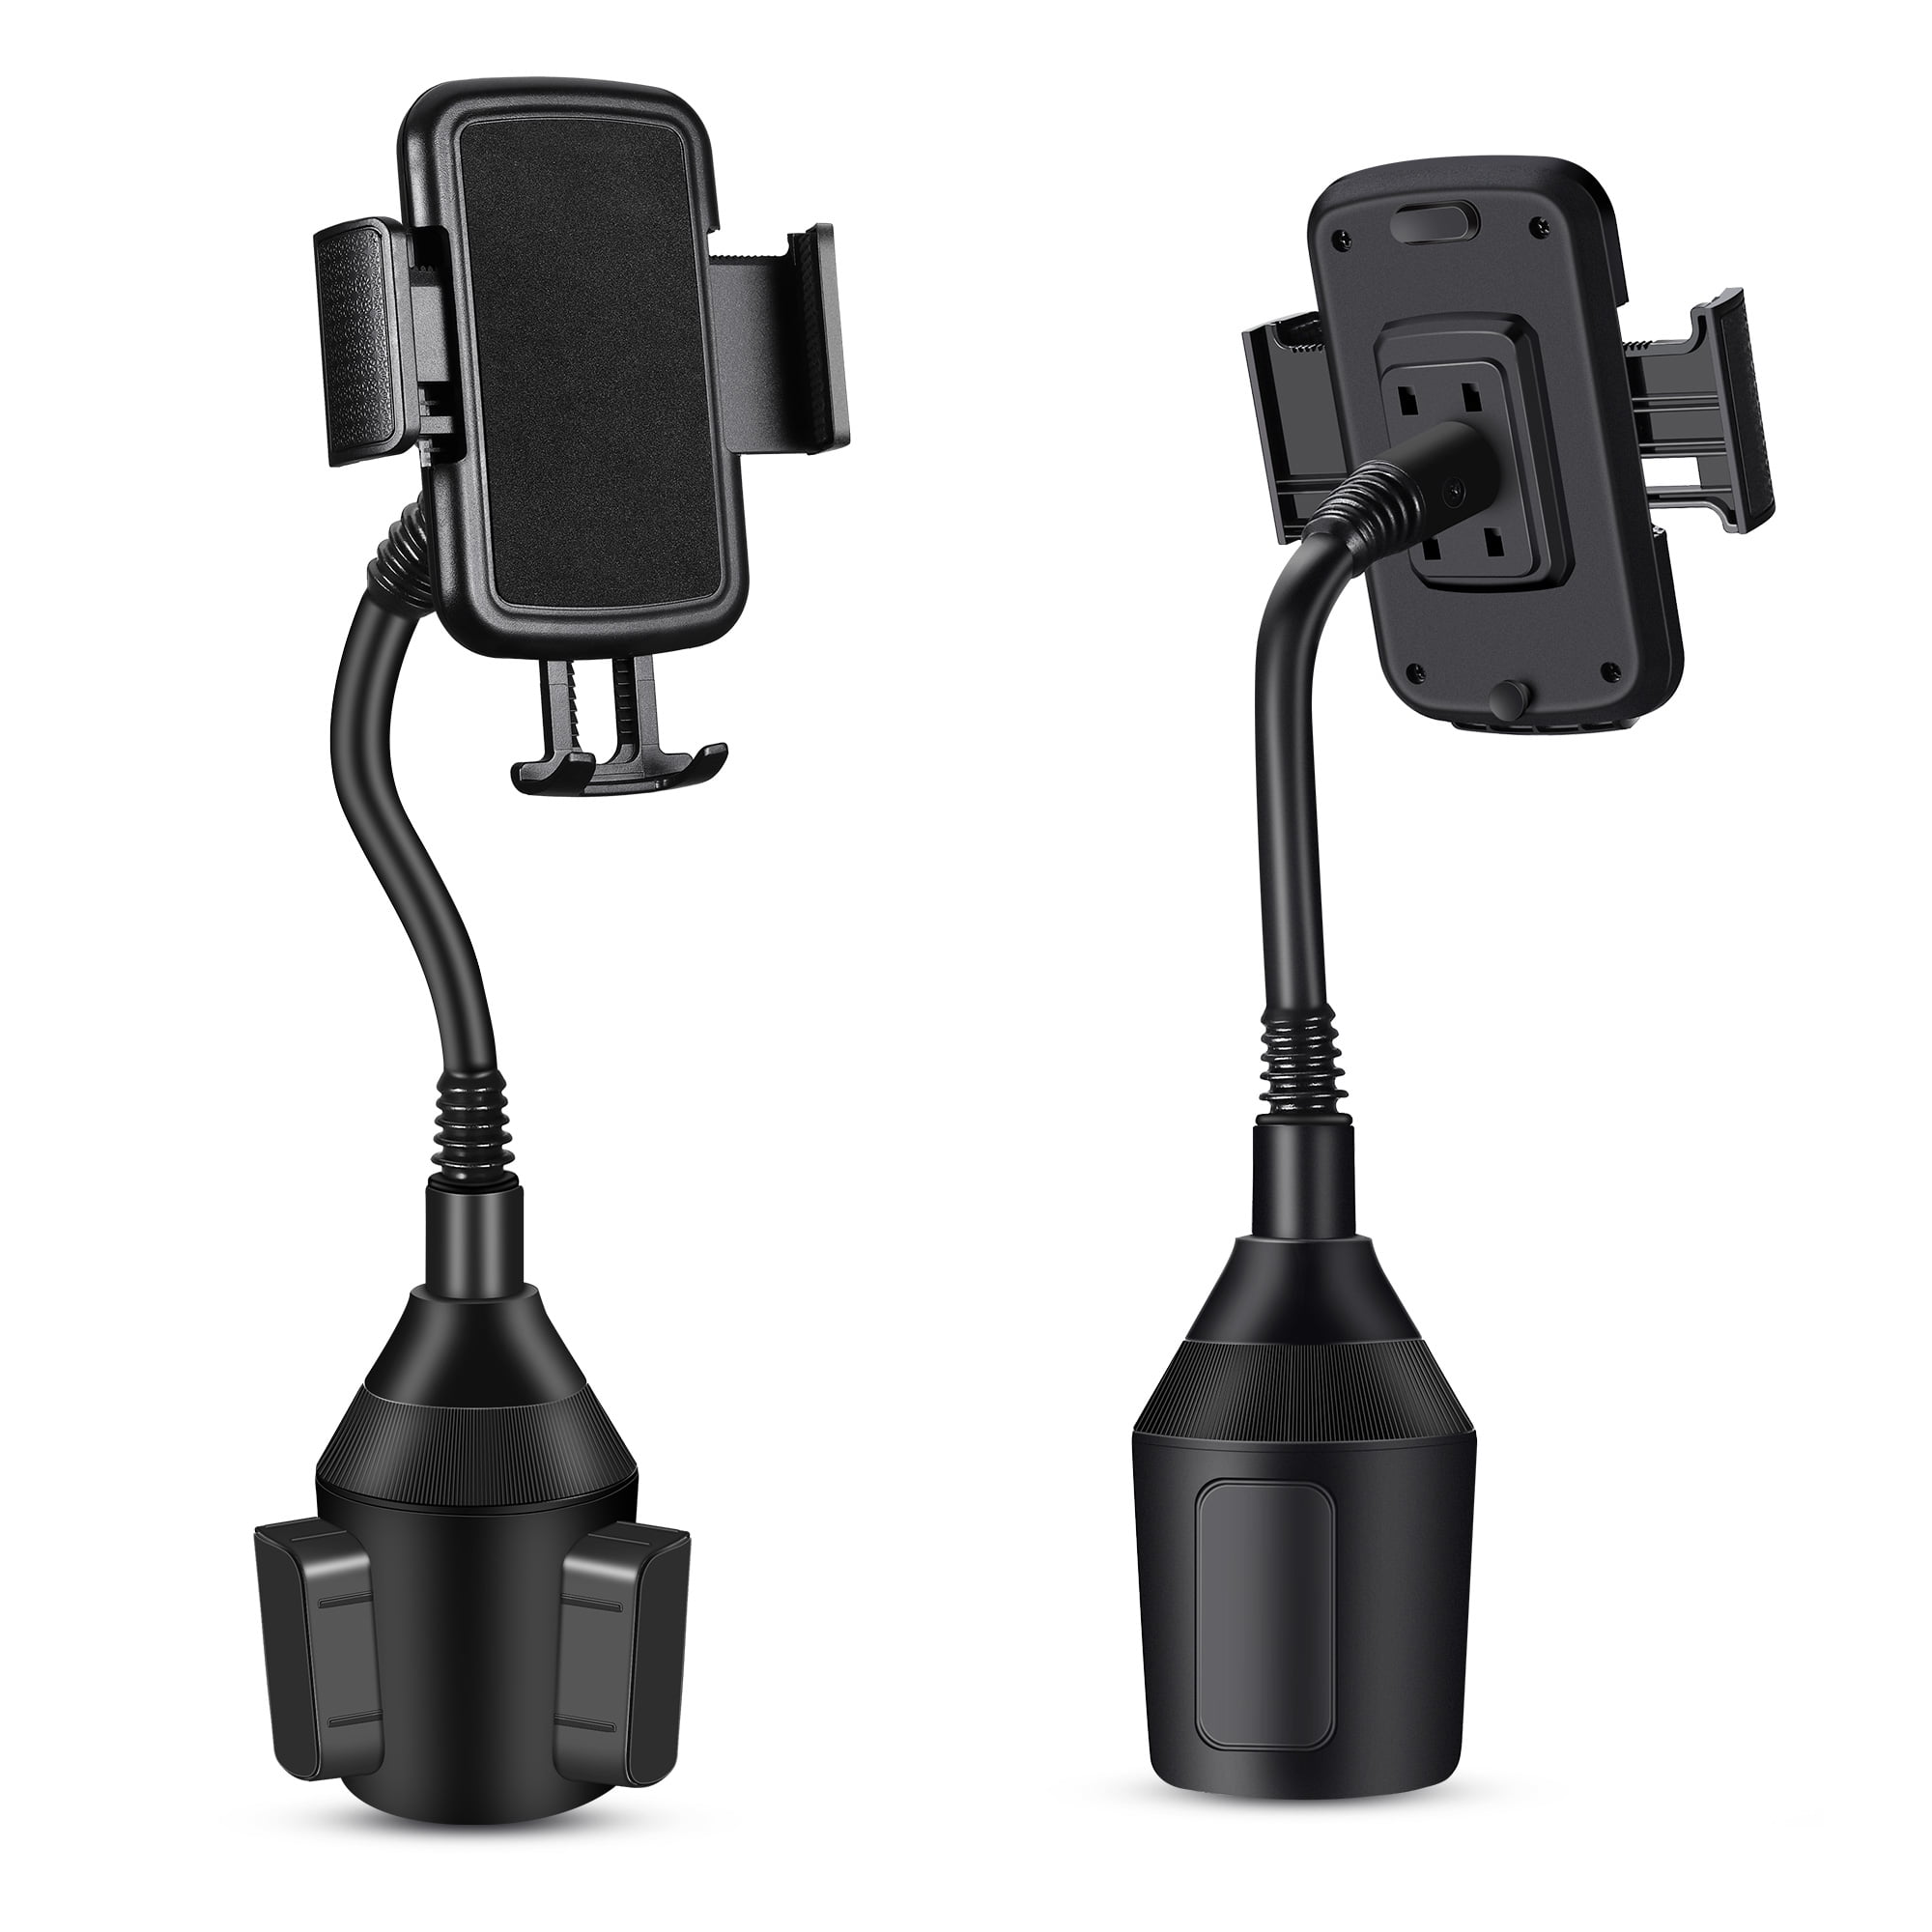 Car Cup Holder,2020 Upgraded Phone Holder for Car Adjustable Cup Holder for Car Automobile Car Cup Holder Phone Mount for iPhone 11 Pro Pro/XR/XS Max/X/8/7 Samsung S10/Note 9/S8 Plus